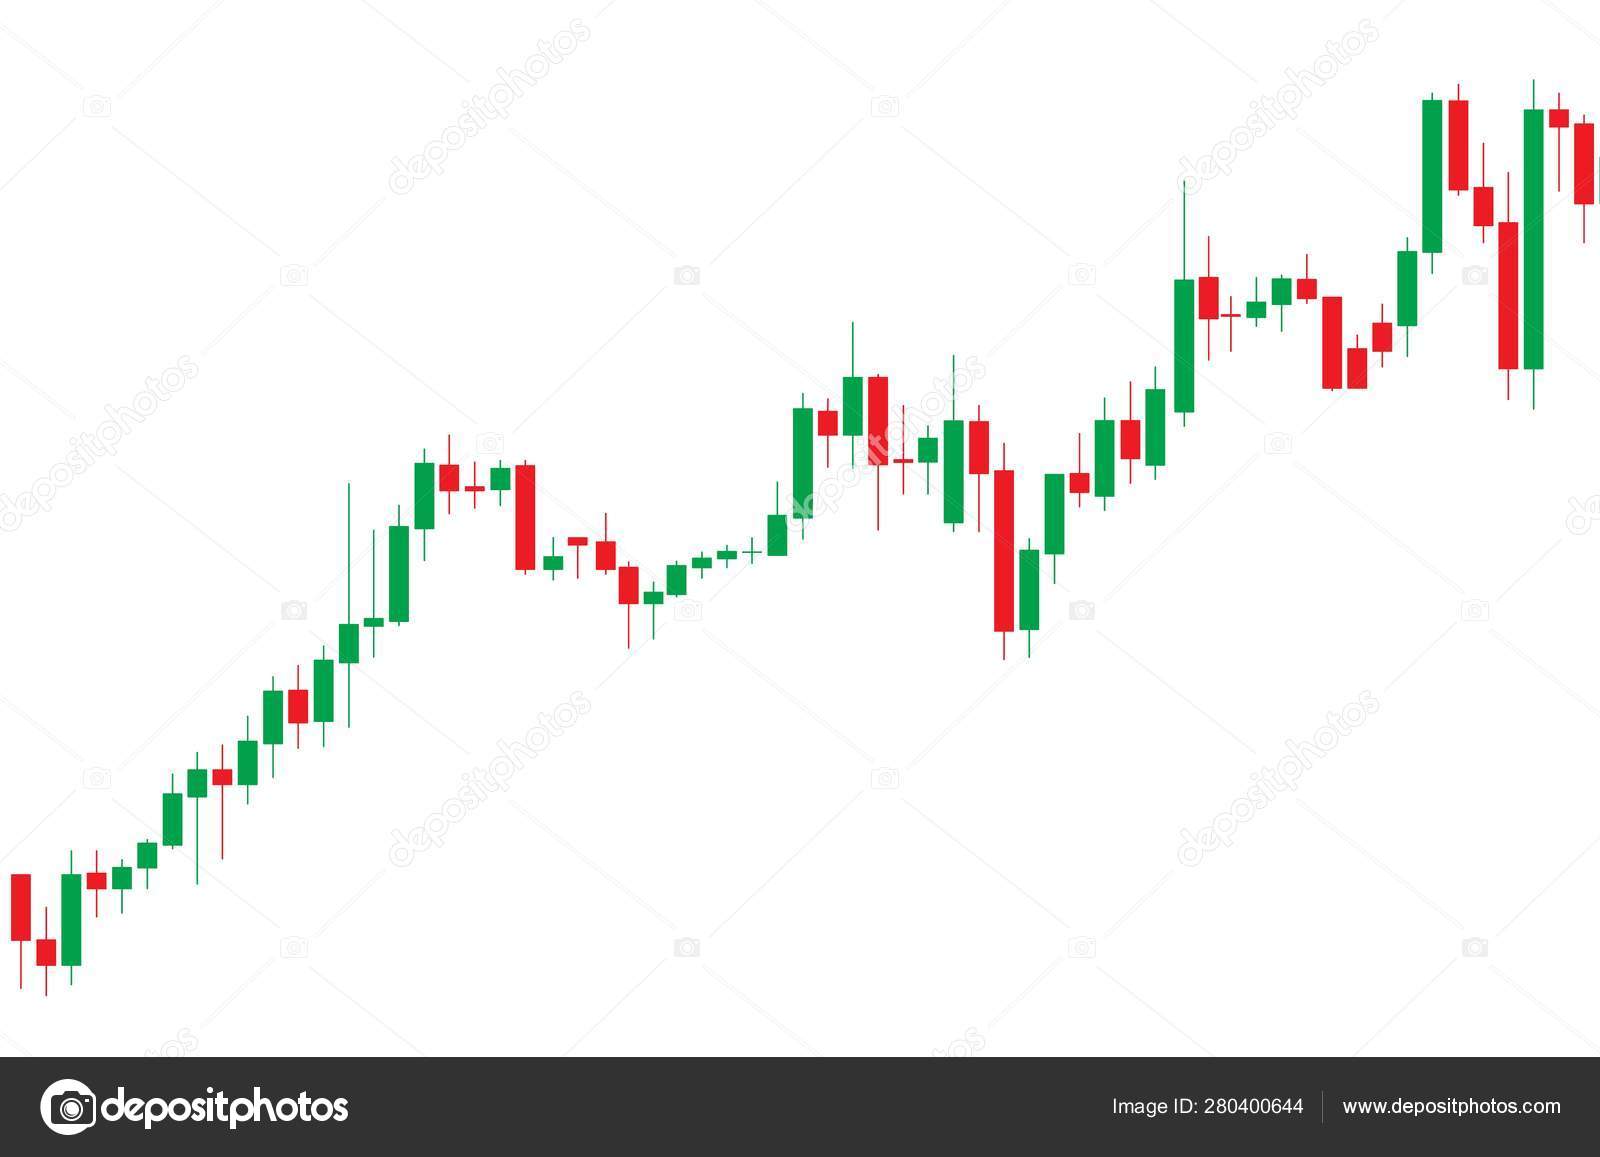 The Art Of Japanese Candlestick Charting